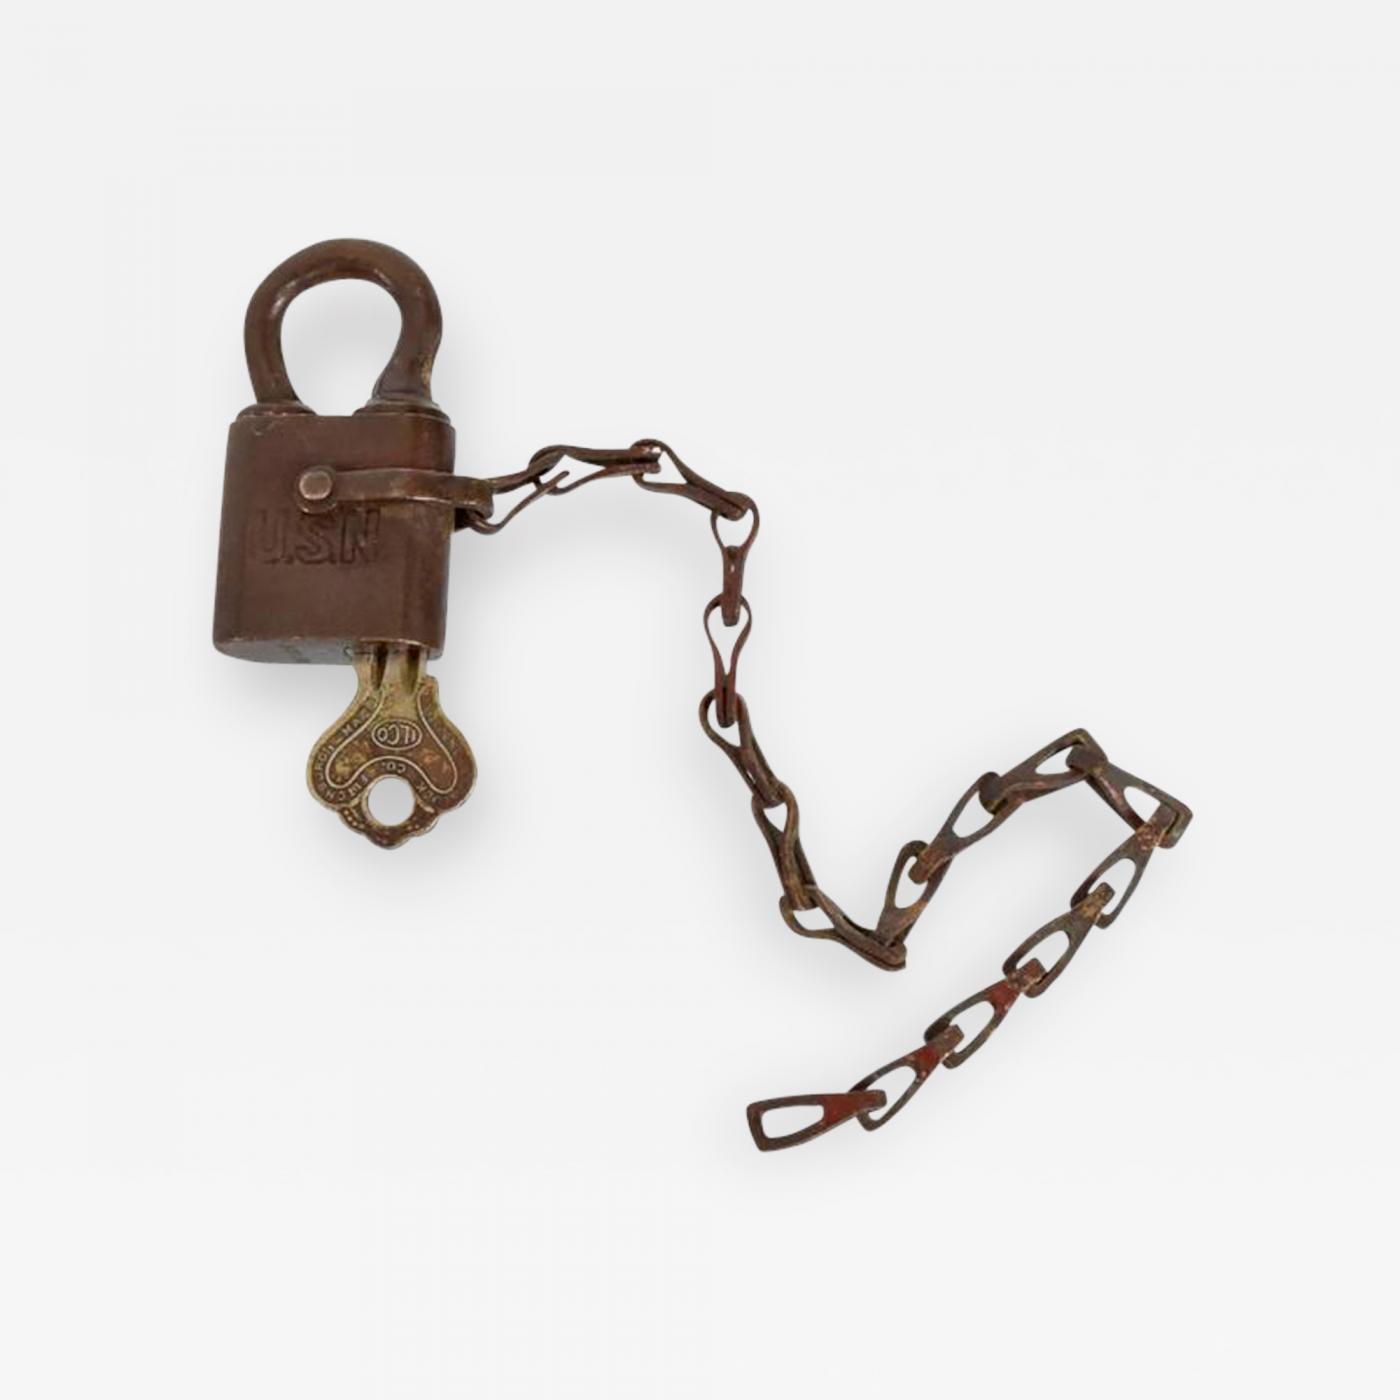 https://cdn.incollect.com/sites/default/files/zoom/-United-States-Navy-Antique-Brass-Lock-for-USN-with-Key-and-Chain-199421-370160.jpg